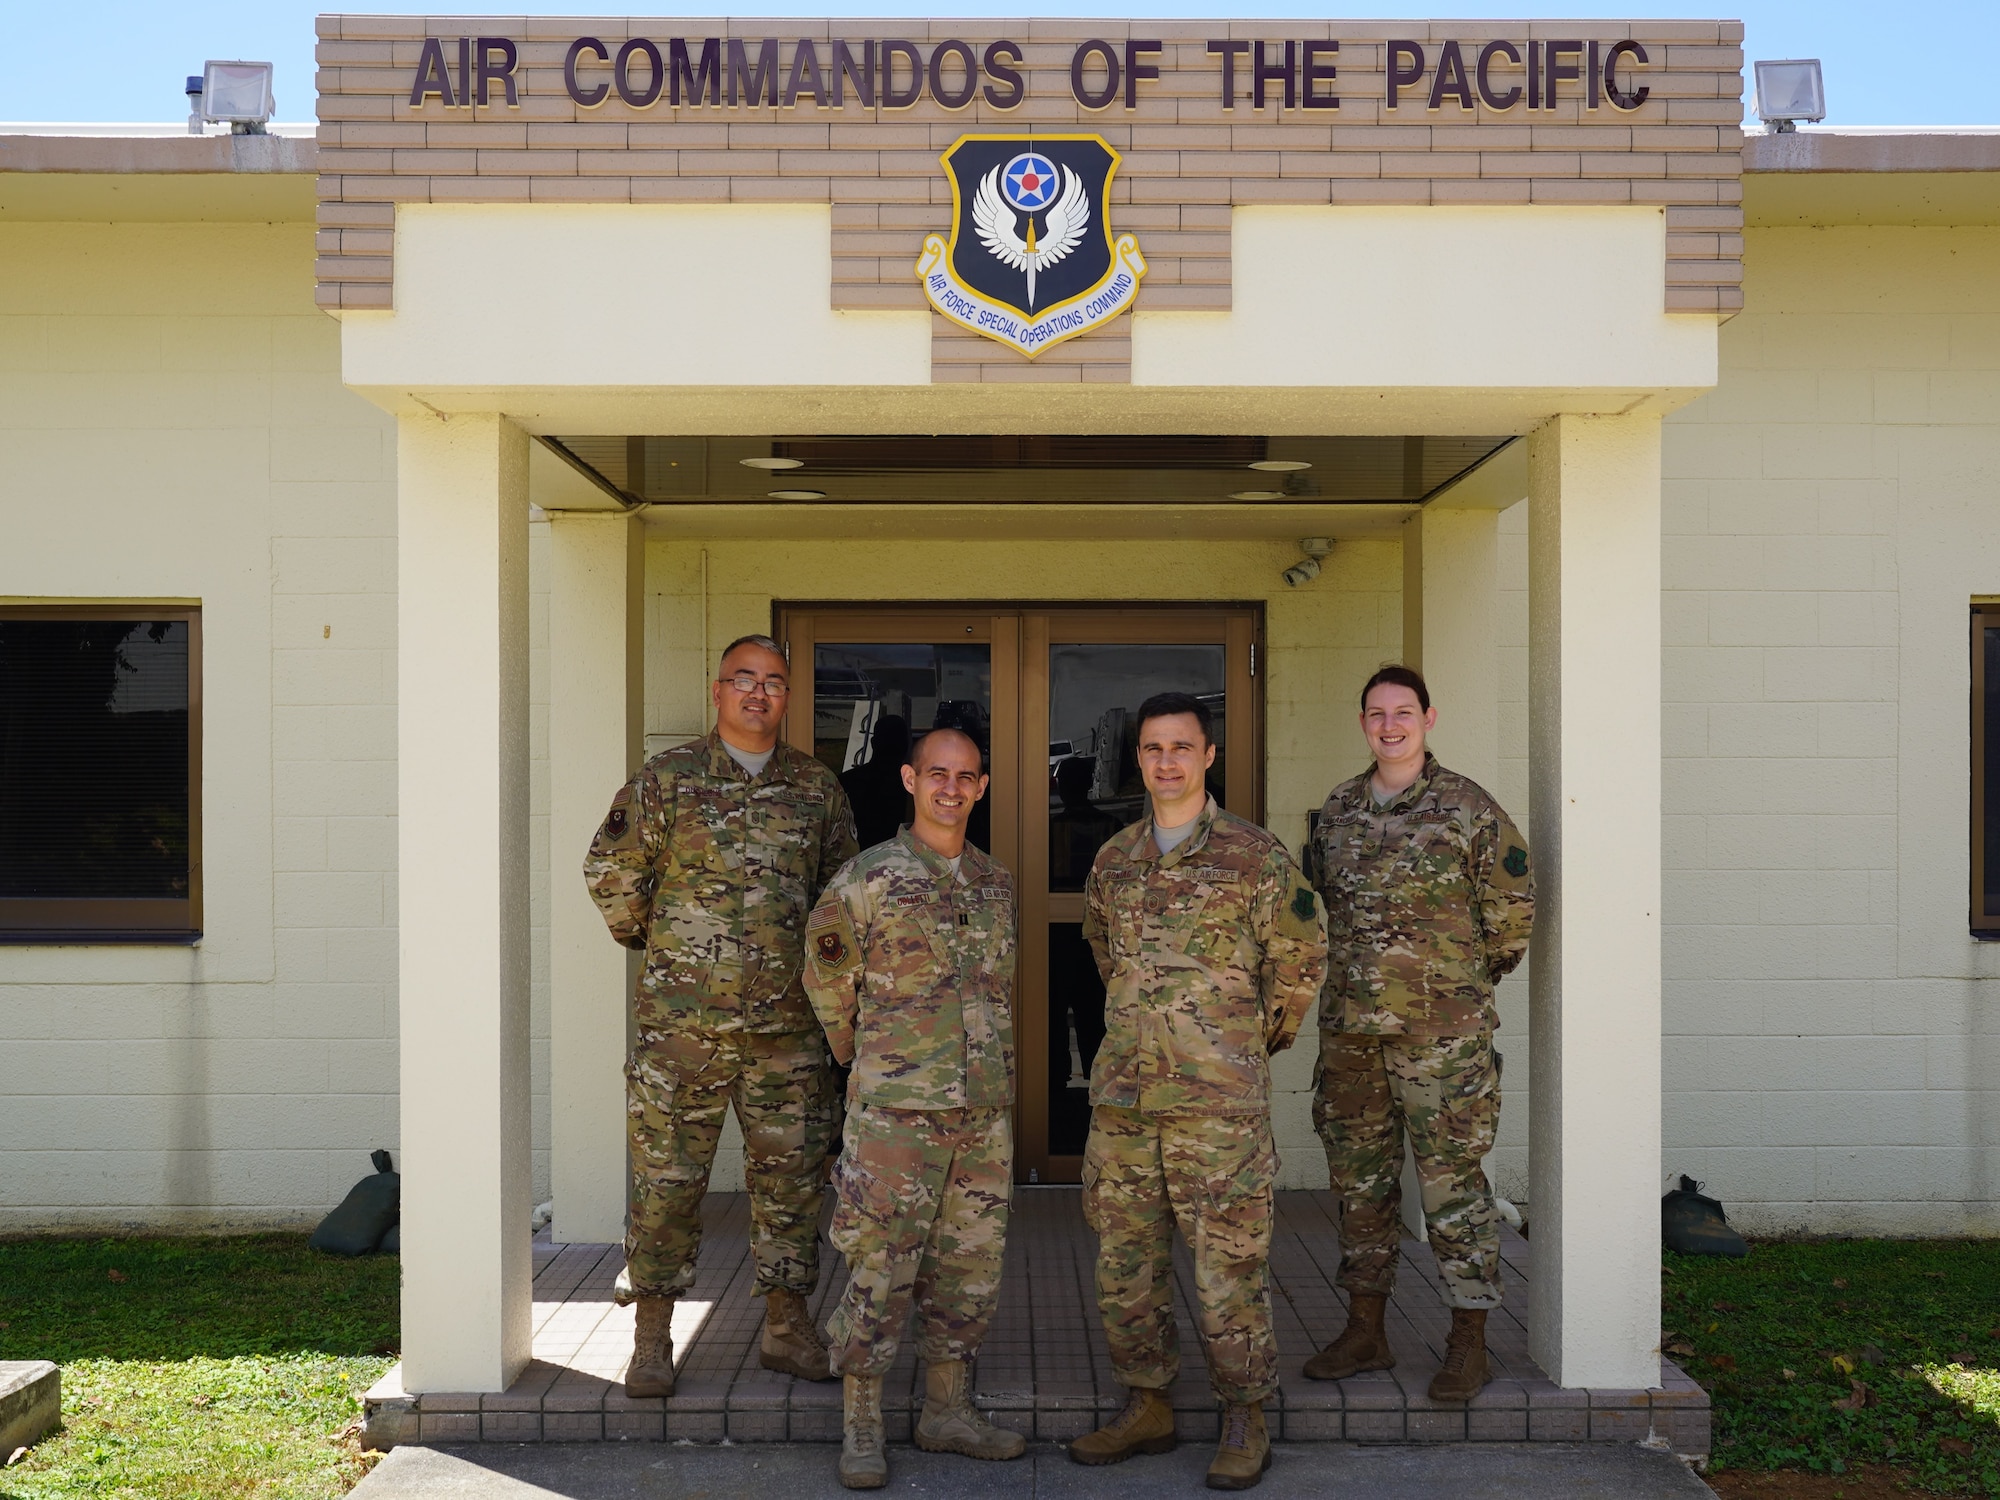 Seen here are U.S. Air Force Capt. Vincent Colletti, 353rd SOG comptroller, Master Sgt. Michael Duchesne, 353rd SOG FM flight chief, Master Sgt. Chad Sontag, 353rd SOG FM superintendent, and Staff Sgt. Lindsey Vaillancourt, 353rd SOG FM financial analyst.